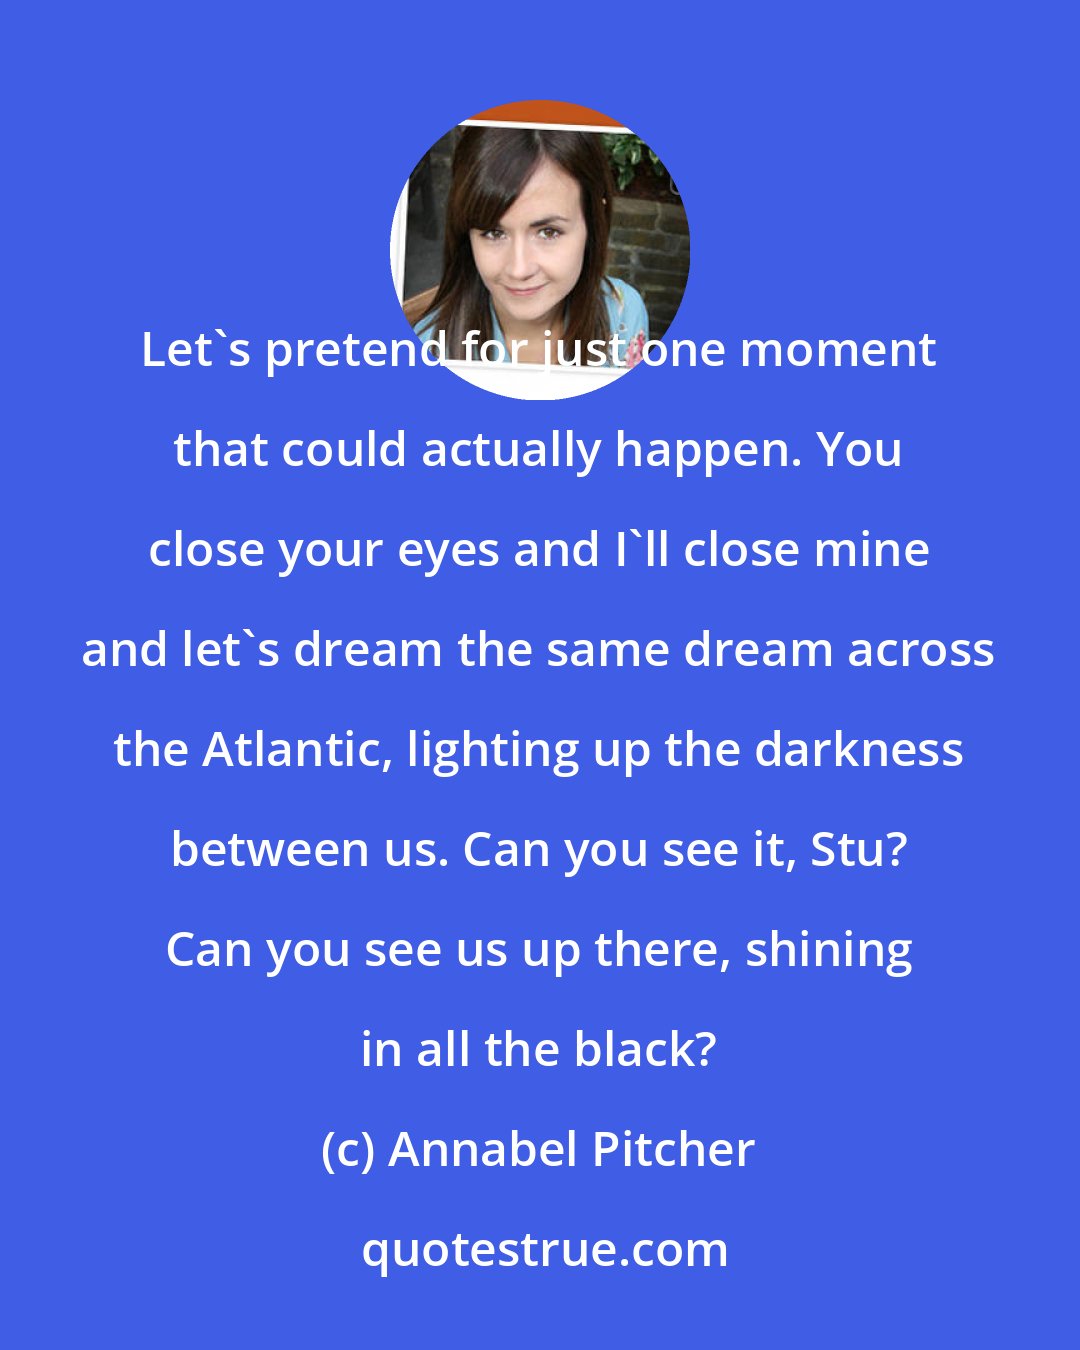 Annabel Pitcher: Let's pretend for just one moment that could actually happen. You close your eyes and I'll close mine and let's dream the same dream across the Atlantic, lighting up the darkness between us. Can you see it, Stu? Can you see us up there, shining in all the black?